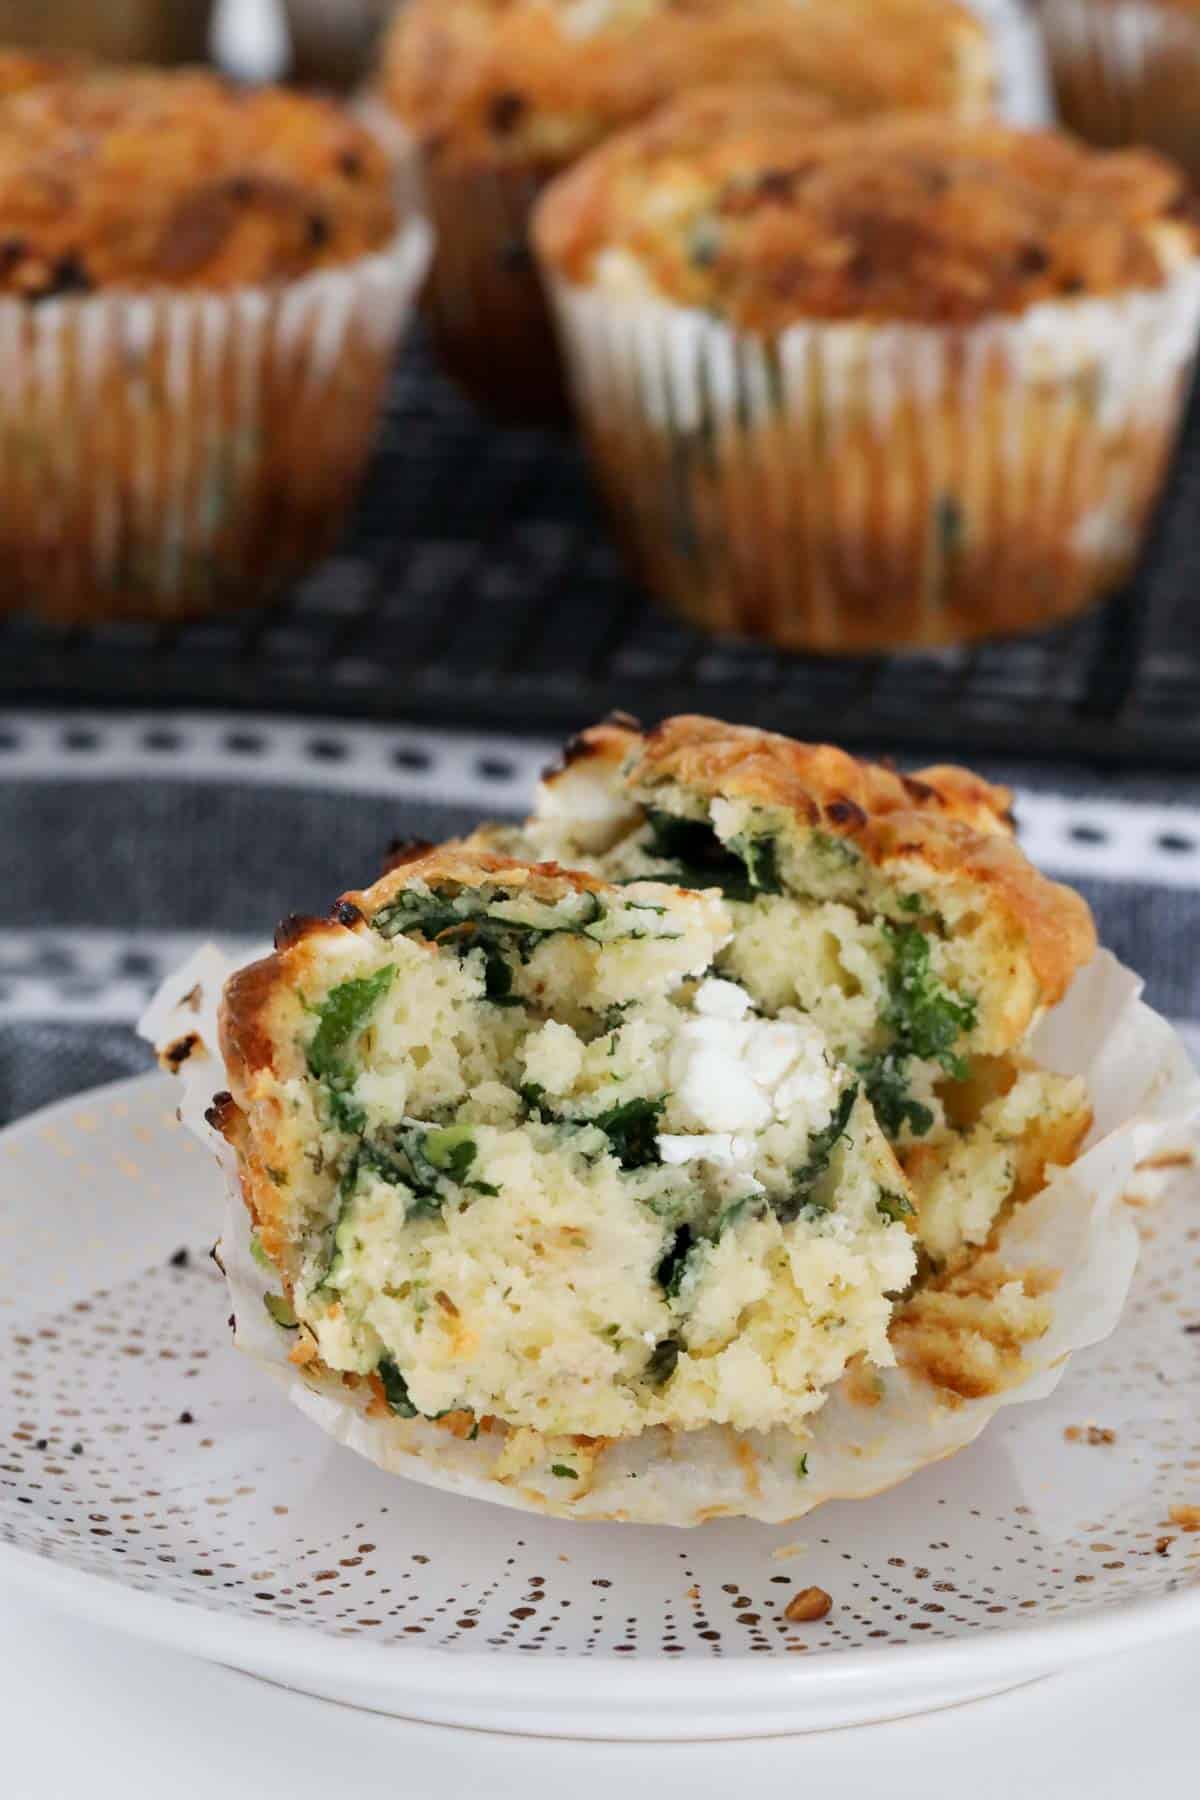 Spinach feta muffin on plate split in two to show the texture.